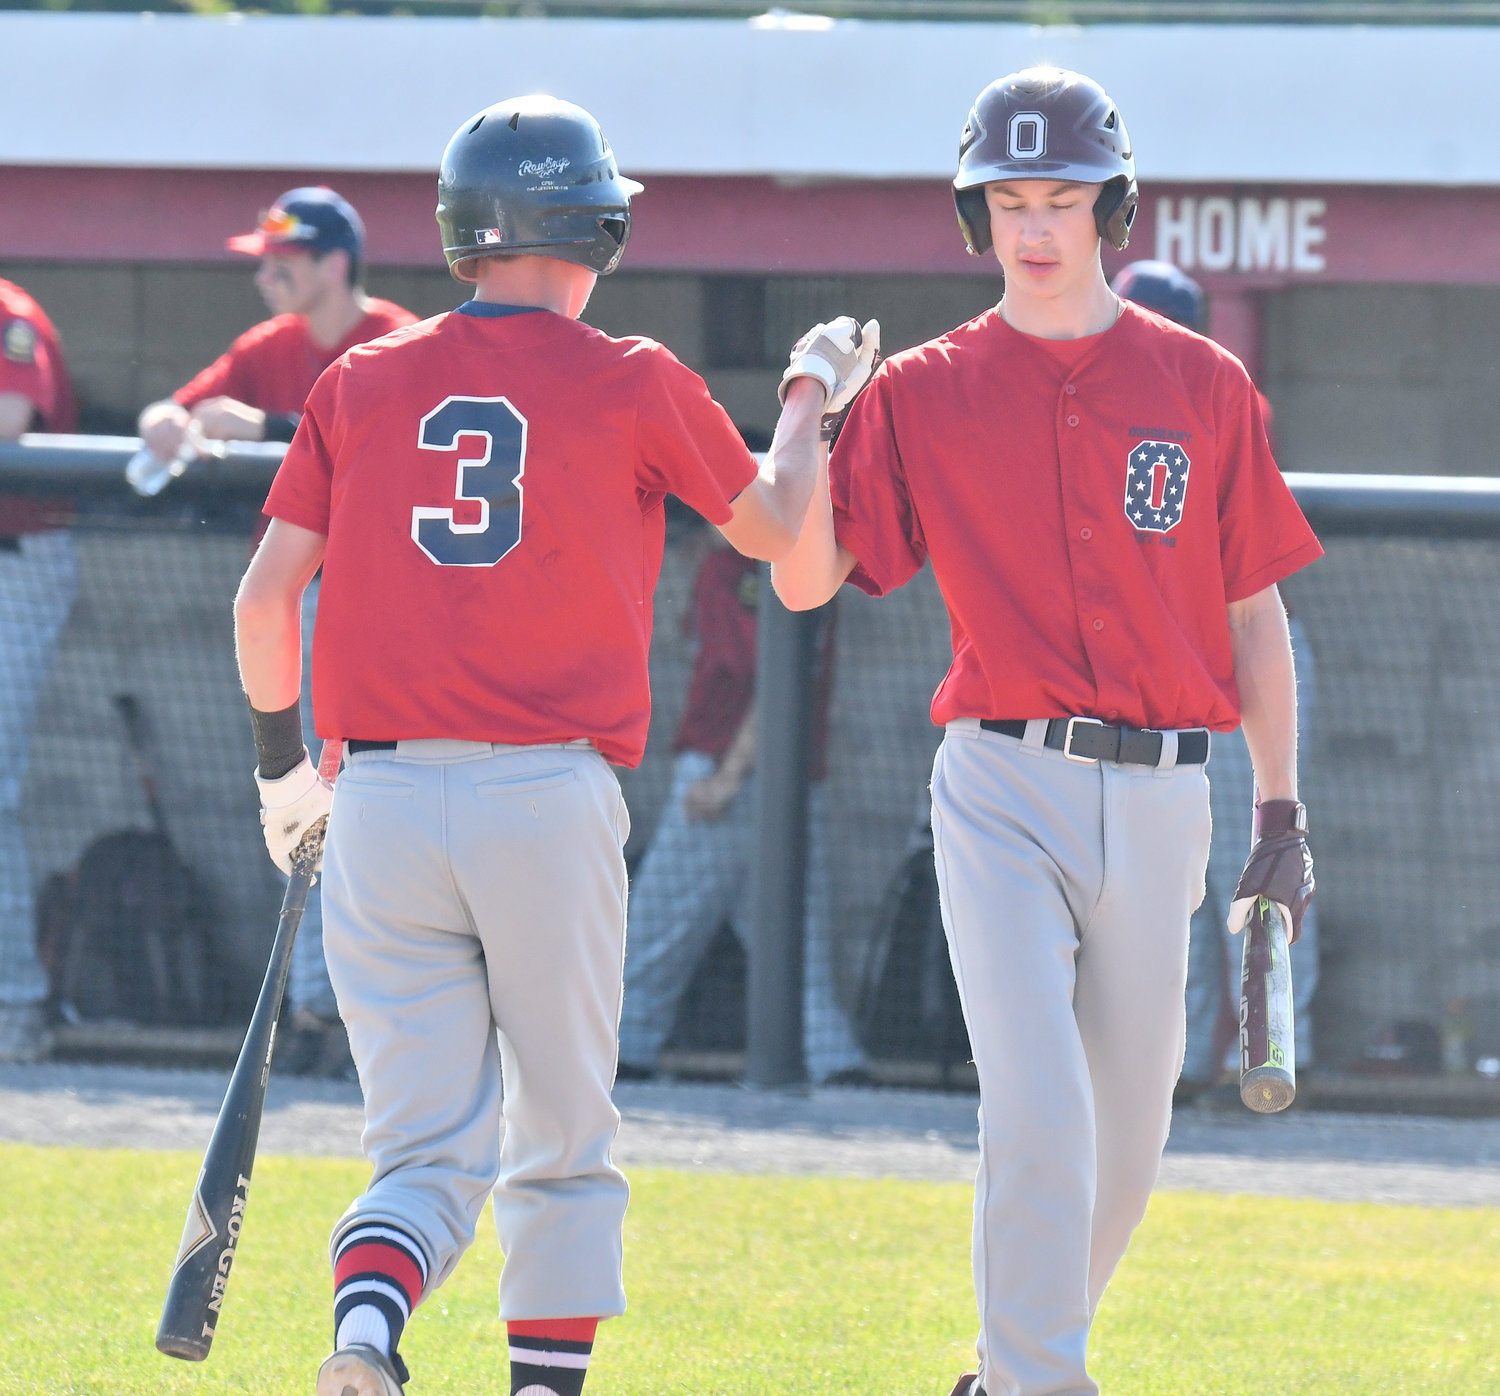 FIRST ROUND WIN — Oriskany Post player Alex Burrows, left, gets congratulations from teammate Joshua Zyskowski after Burrows scored the first run of the District V American Legion playoff game Monday in the team’s 11-1 win over Miller Post of Canastota at DeLutis Field in Rome.